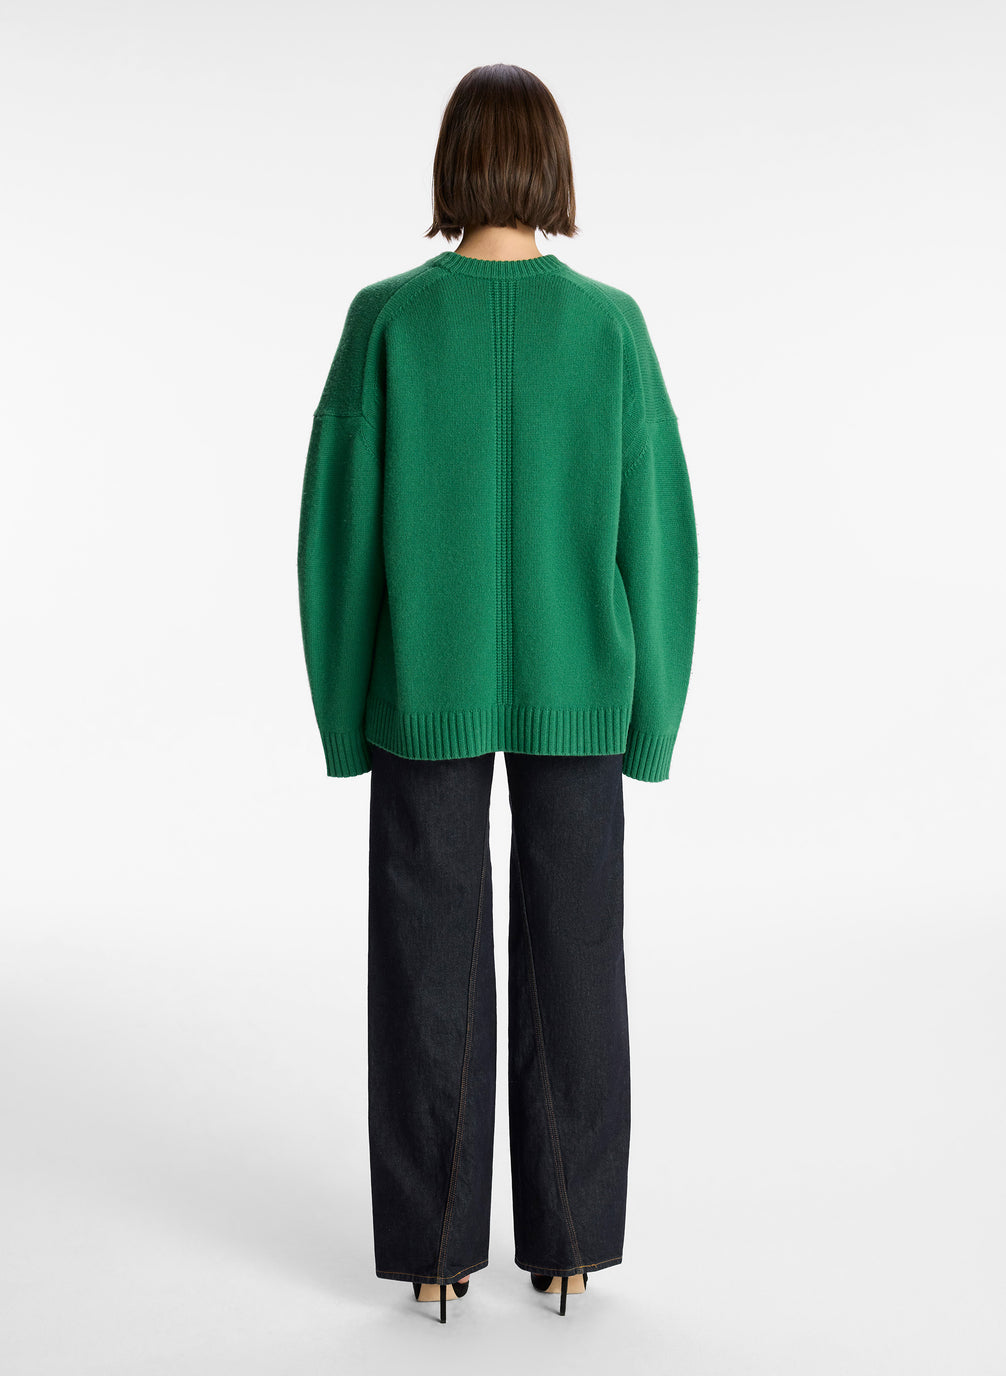 back view of woman wearing green cashmere long sleeve sweater